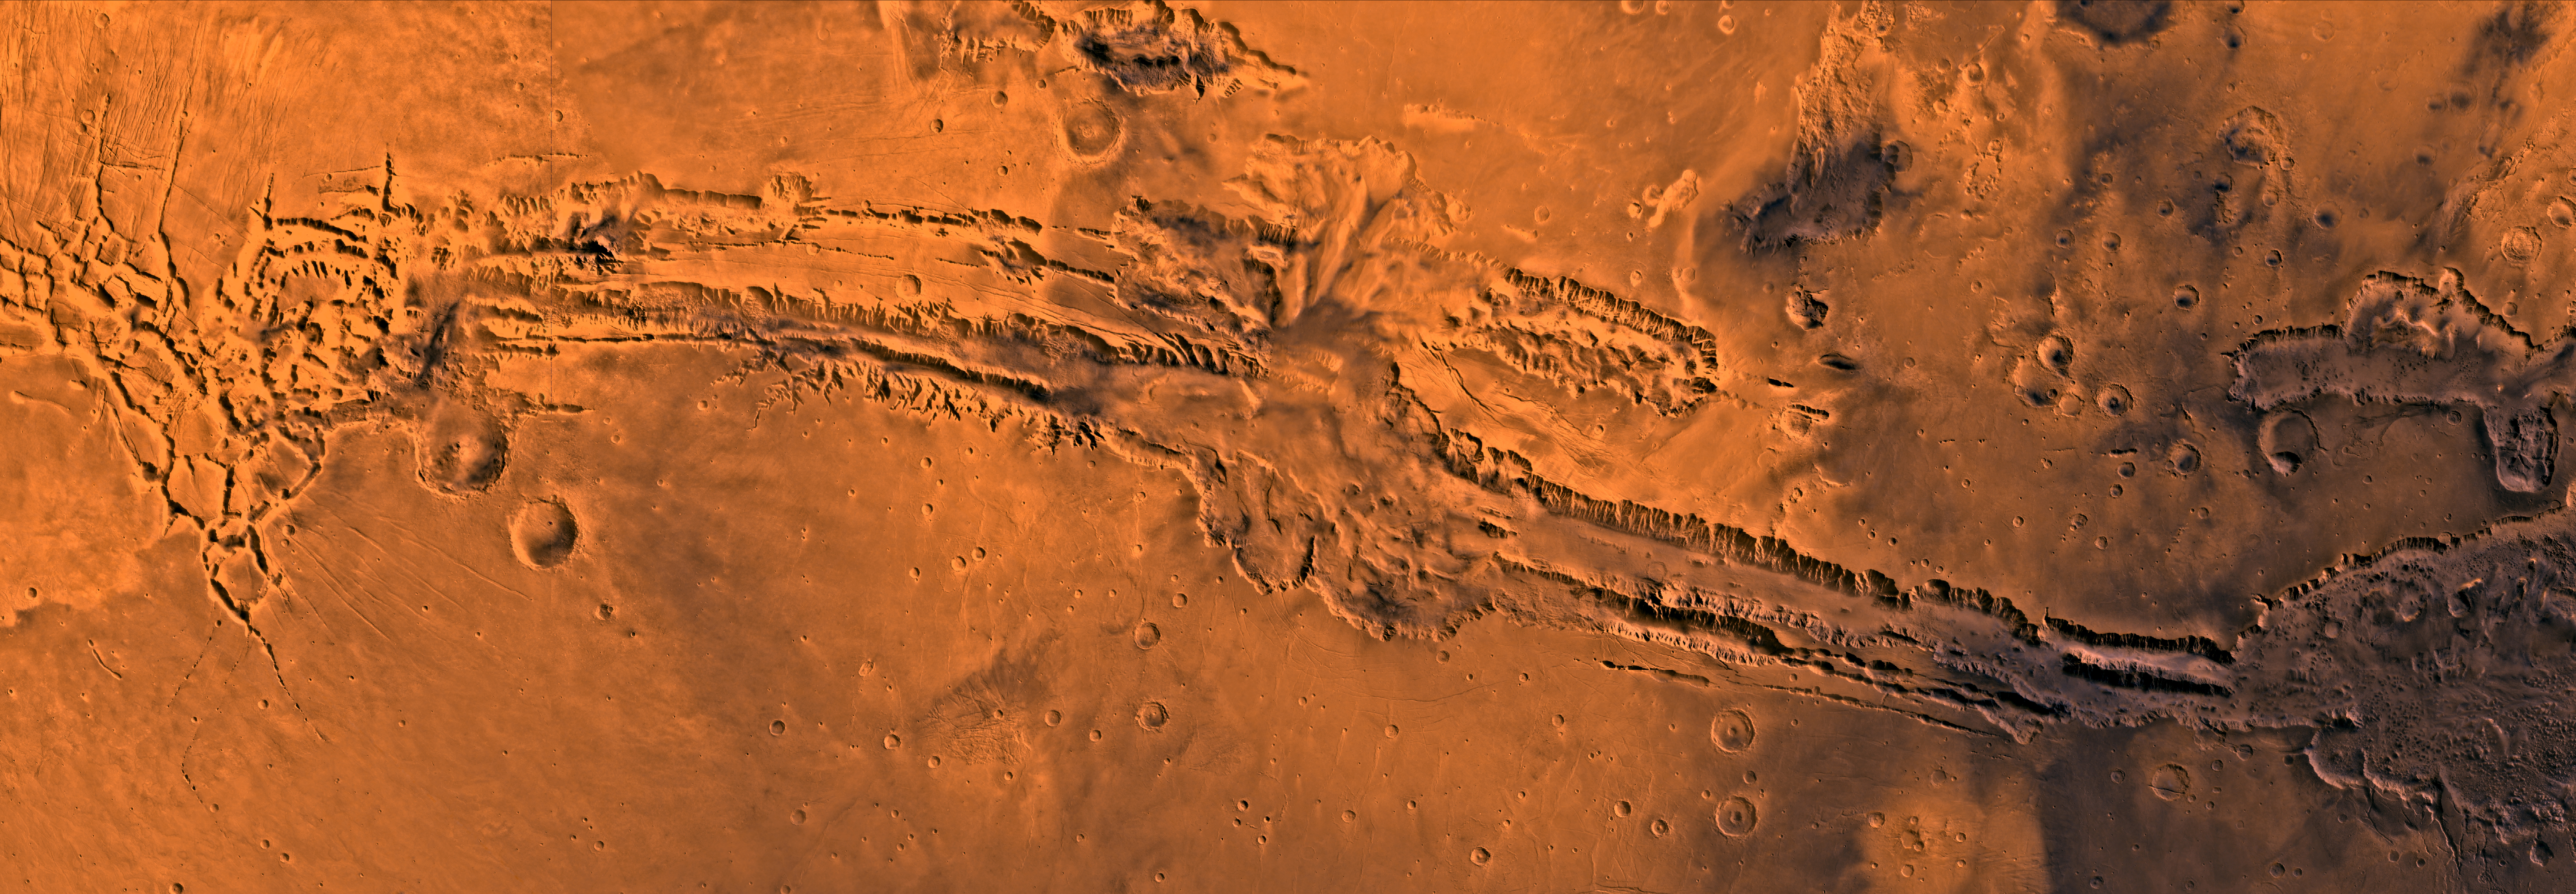 Valles Marineris is a vast canyon system that runs along the Martian equator.